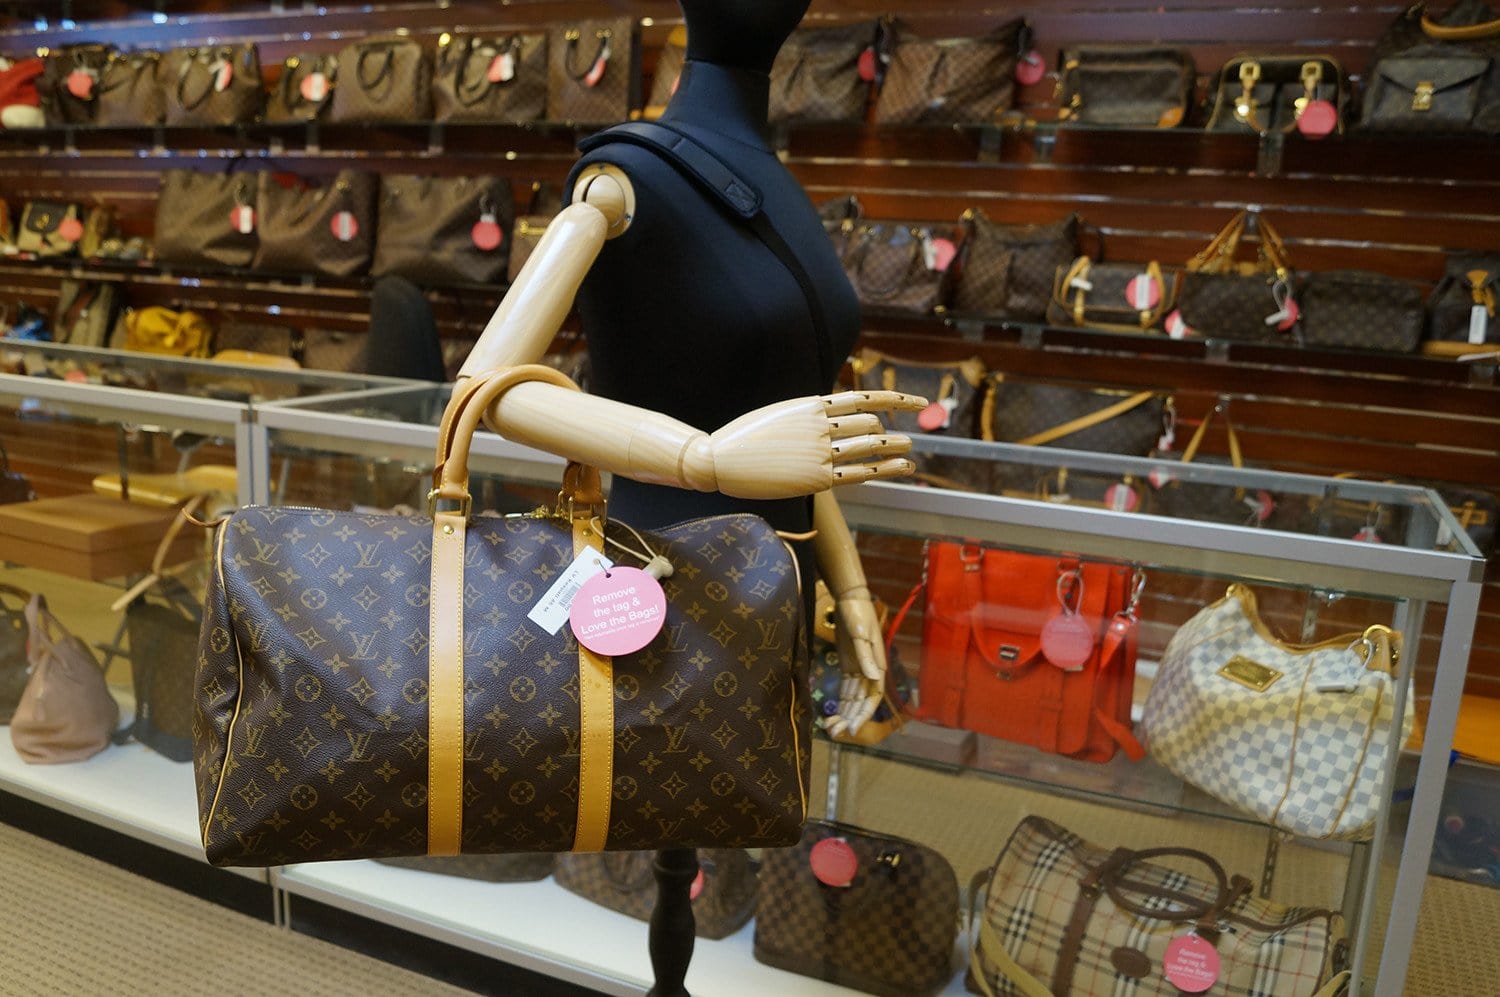 How to store LOUIS VUITTON Bags 